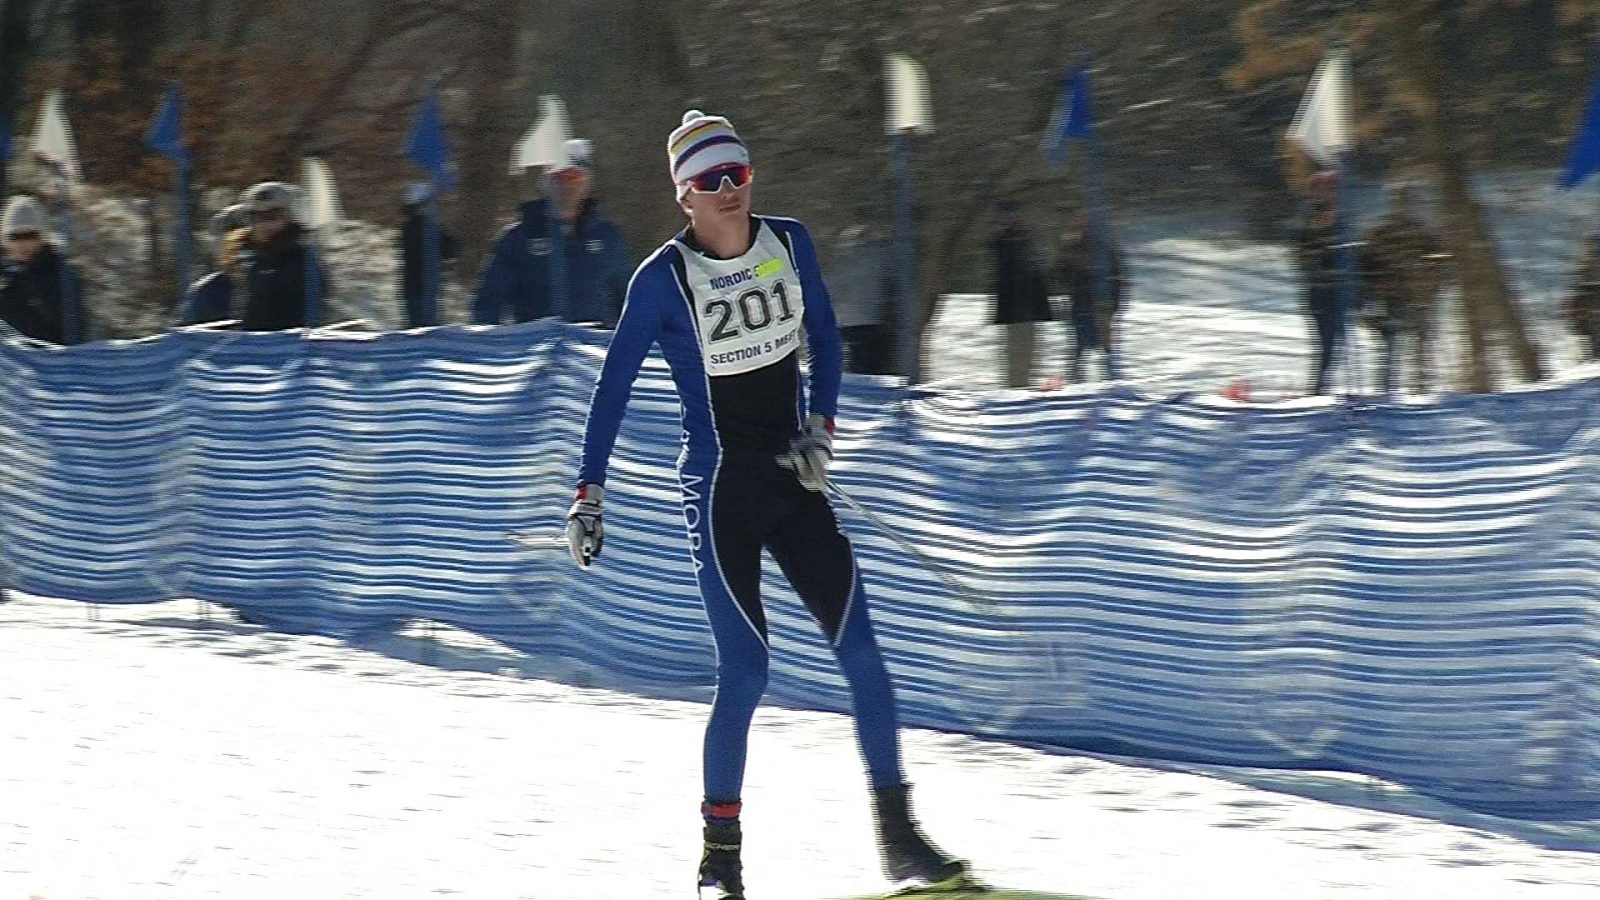 Local Skiers Shine at Section 5 Nordic Ski Meet - CCX Media